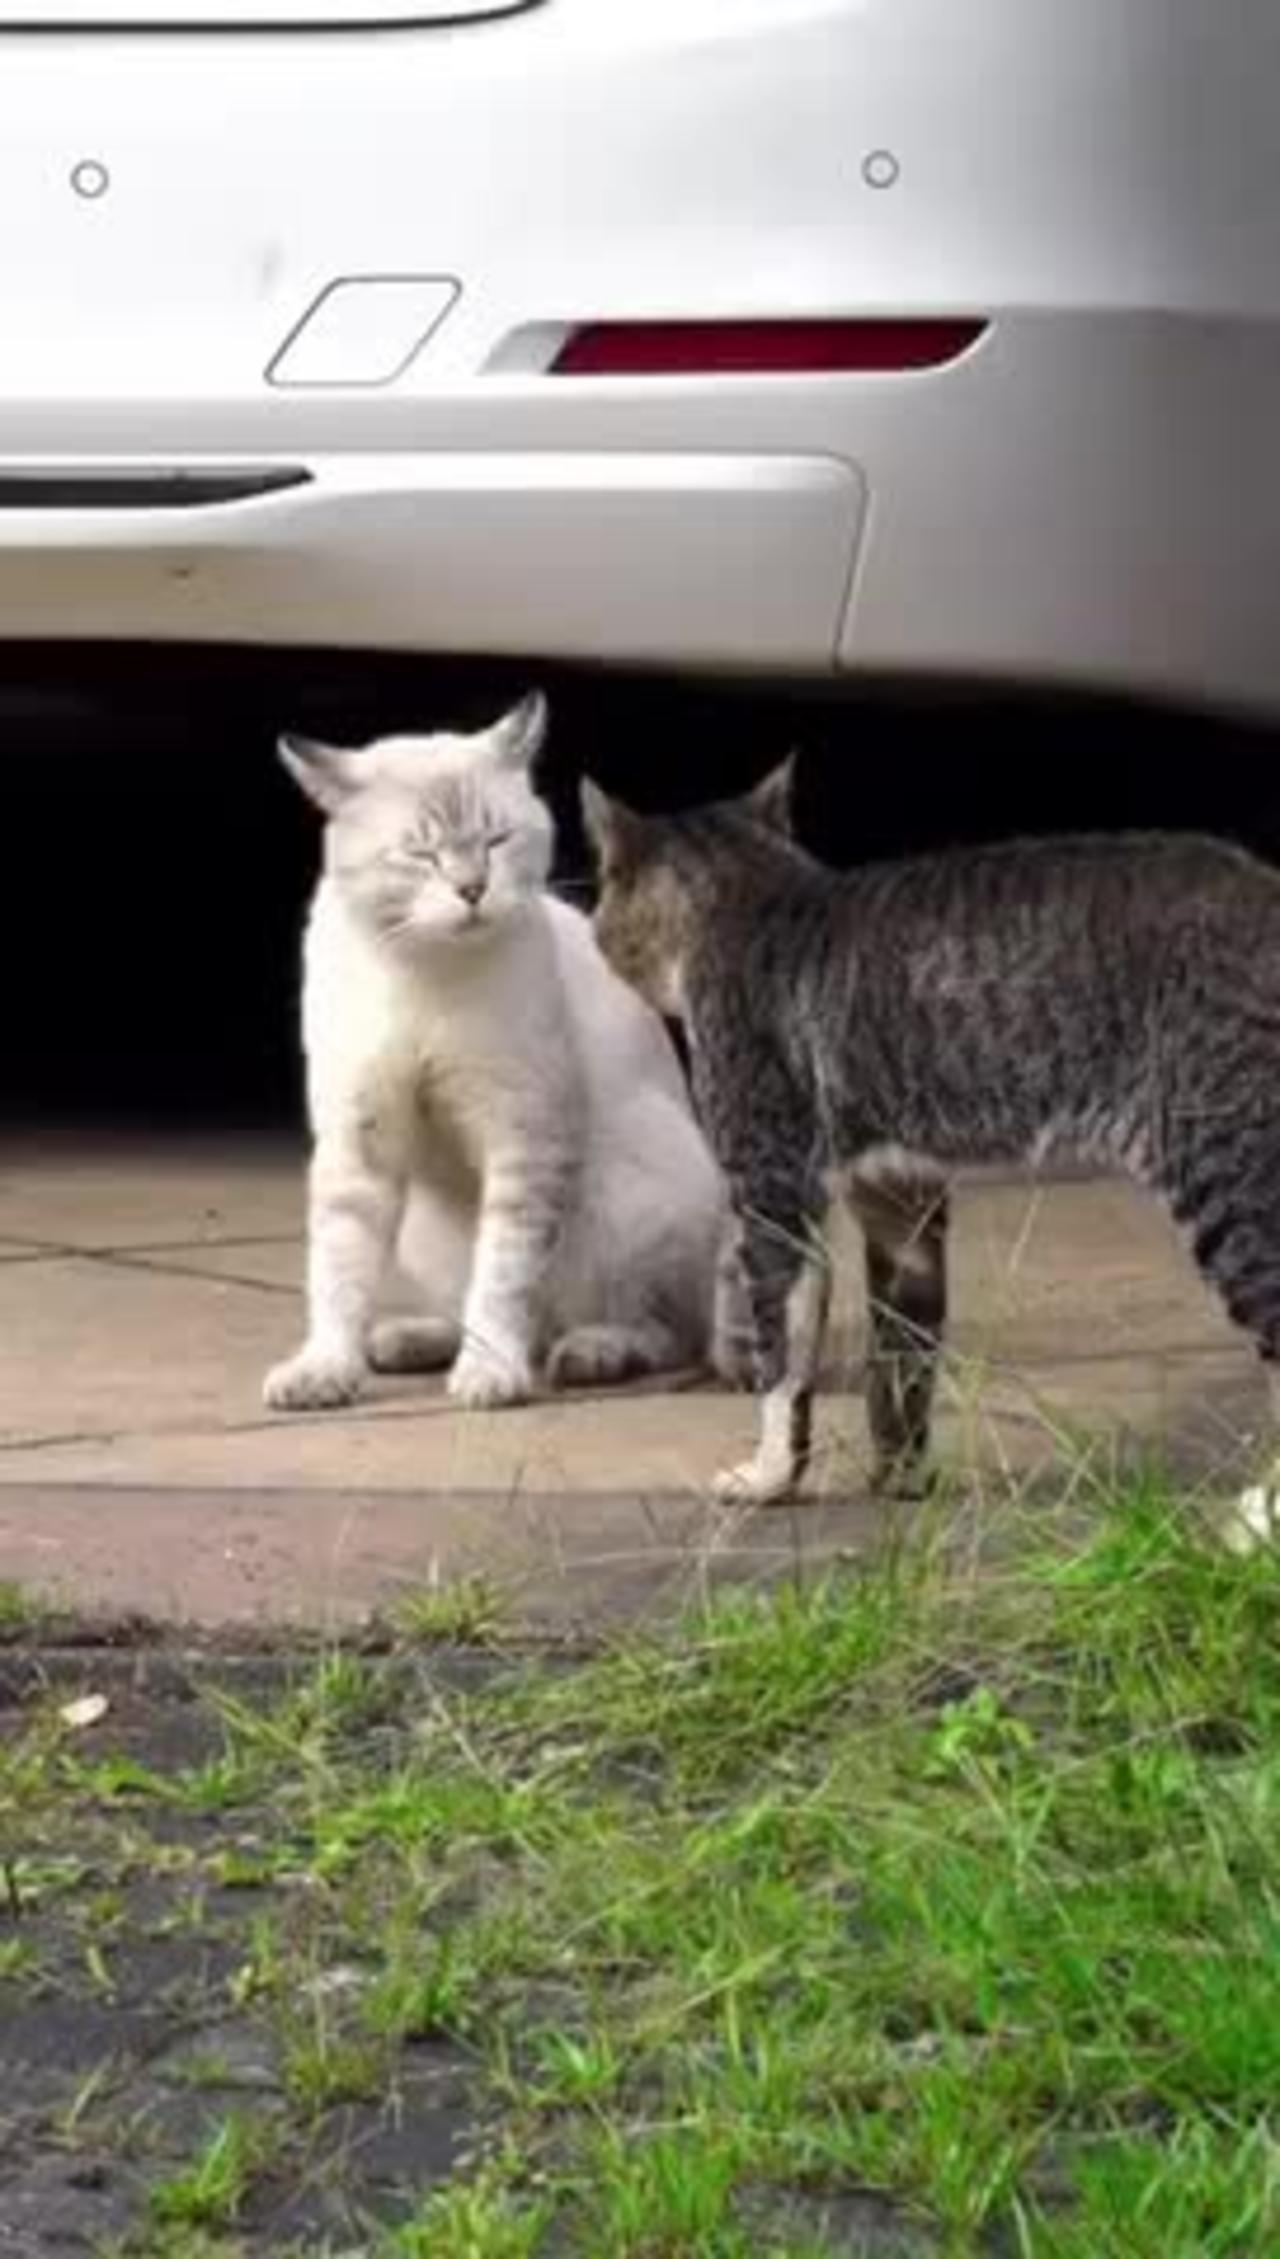 Couple cats fight . Funny to watch 😂